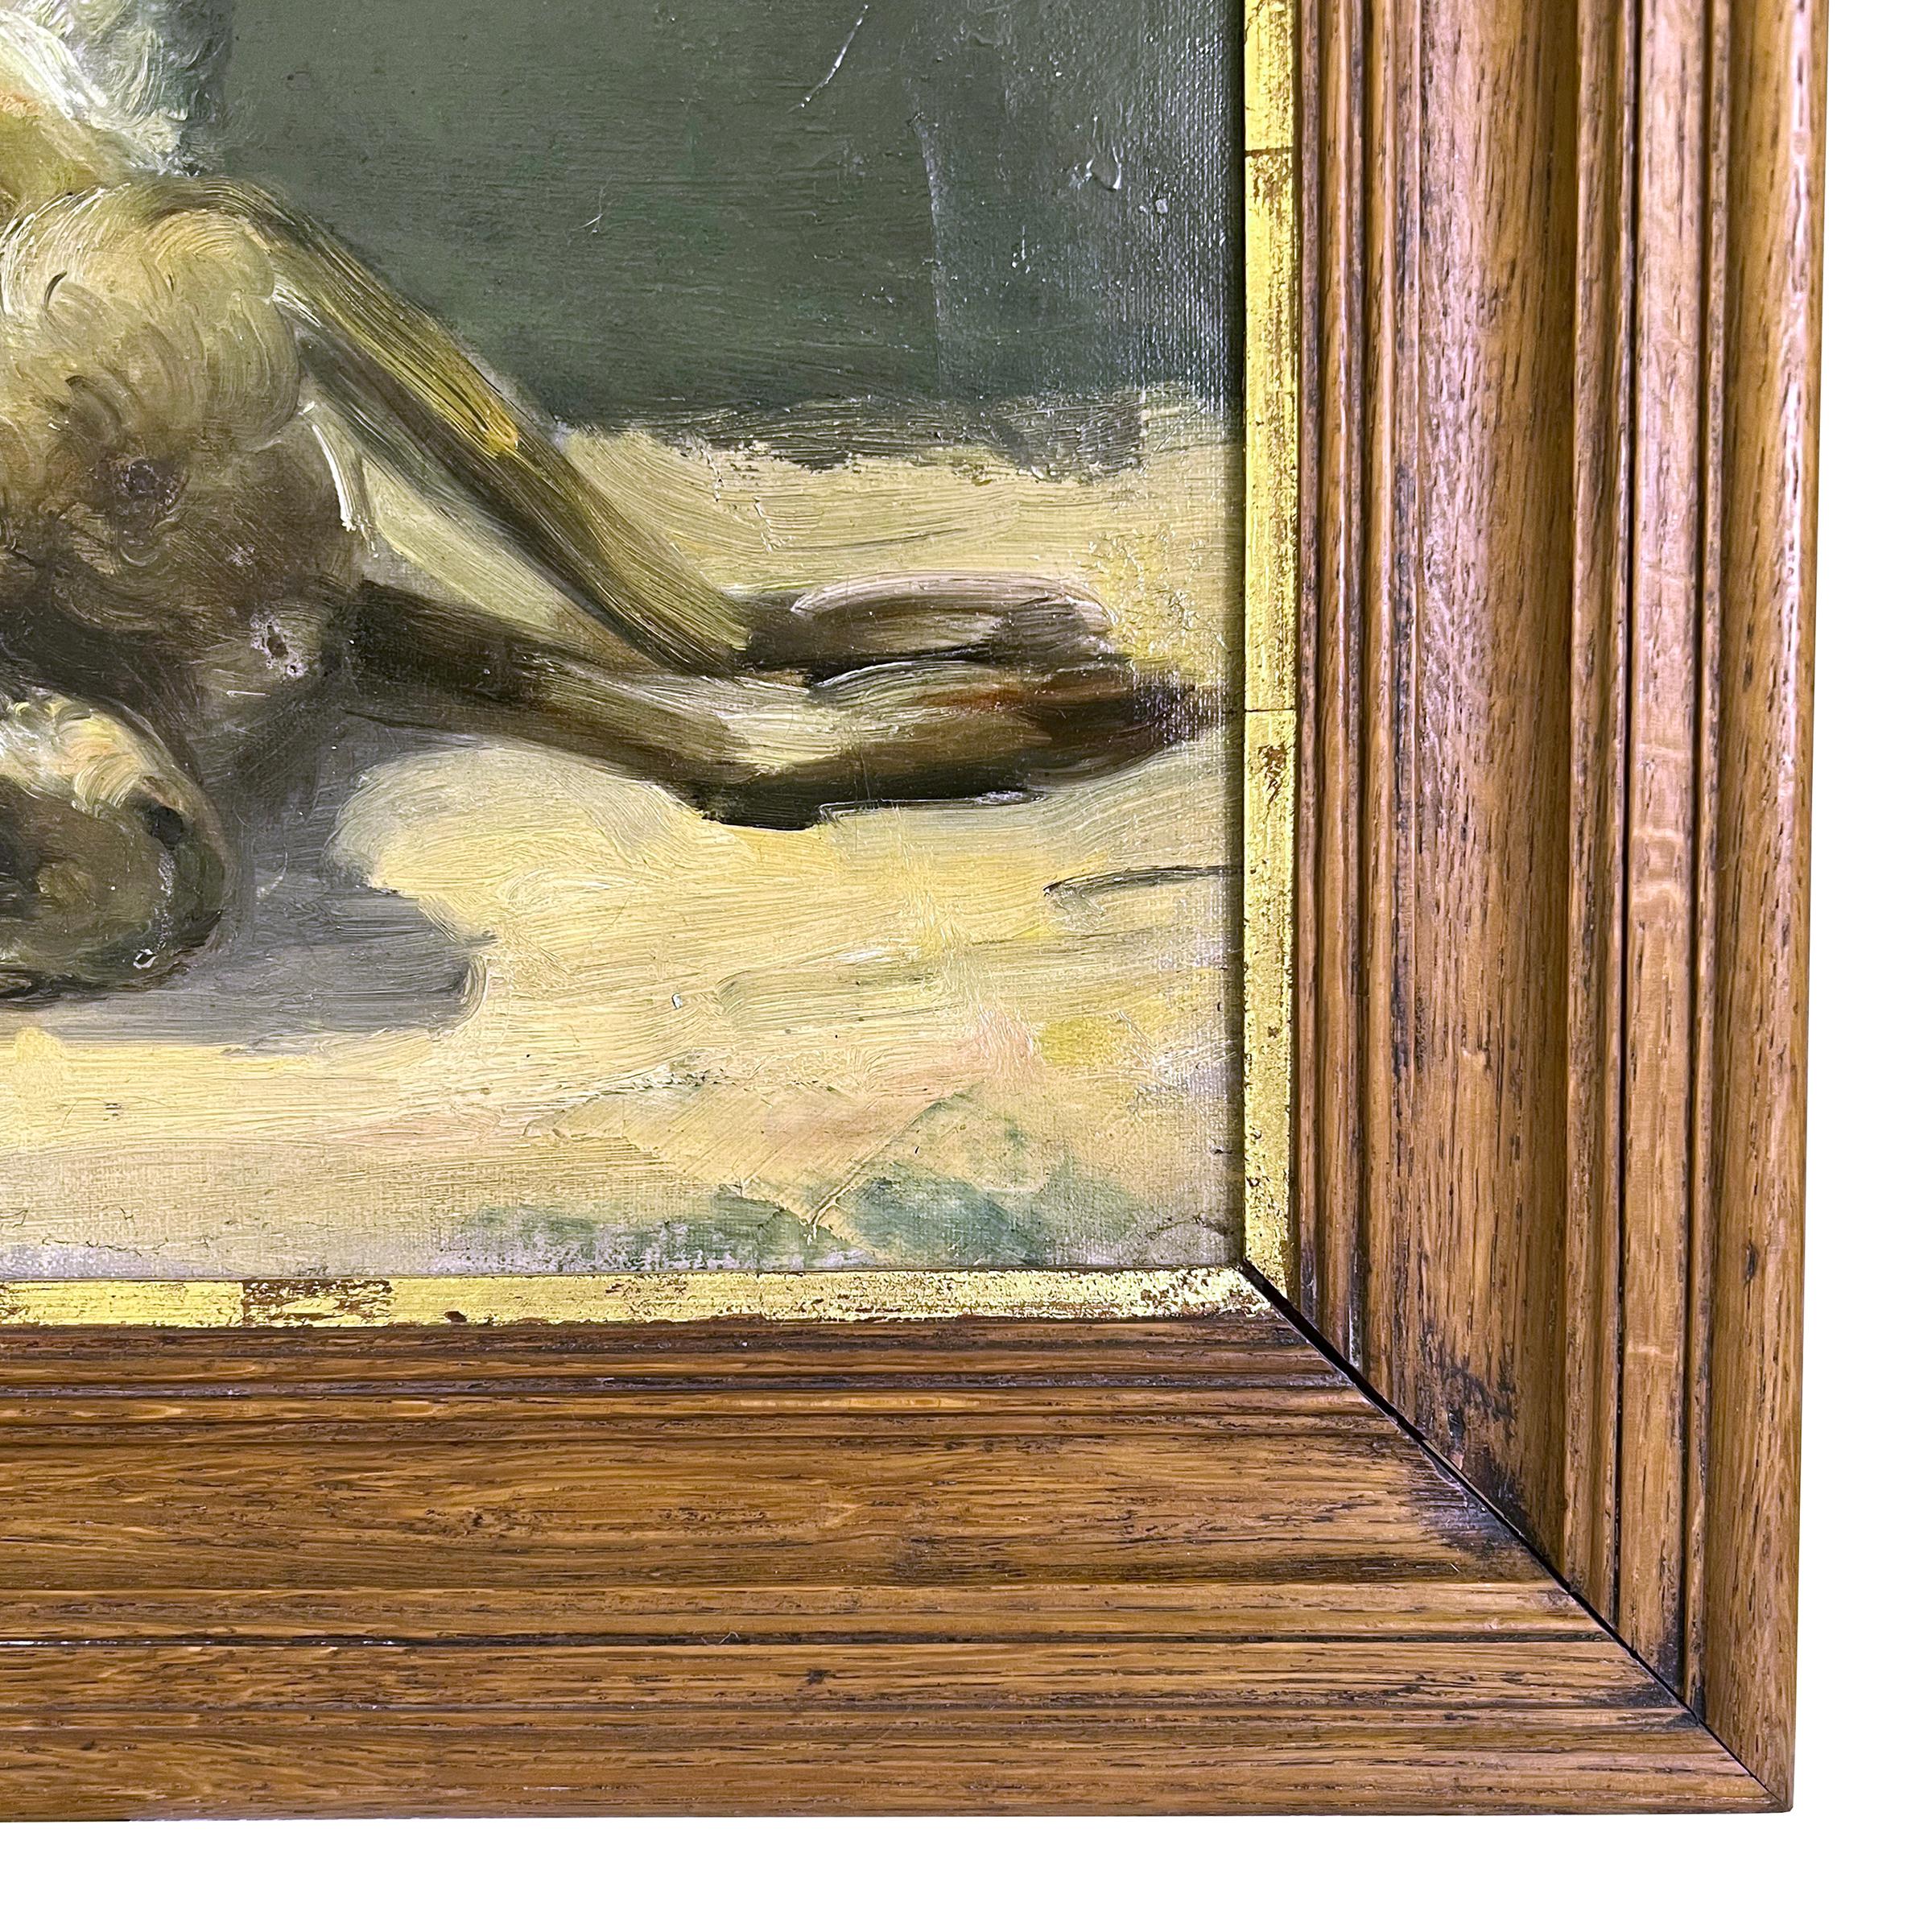 19th Century Belgian Hare Hunting Trophy Still Life Painting For Sale 6